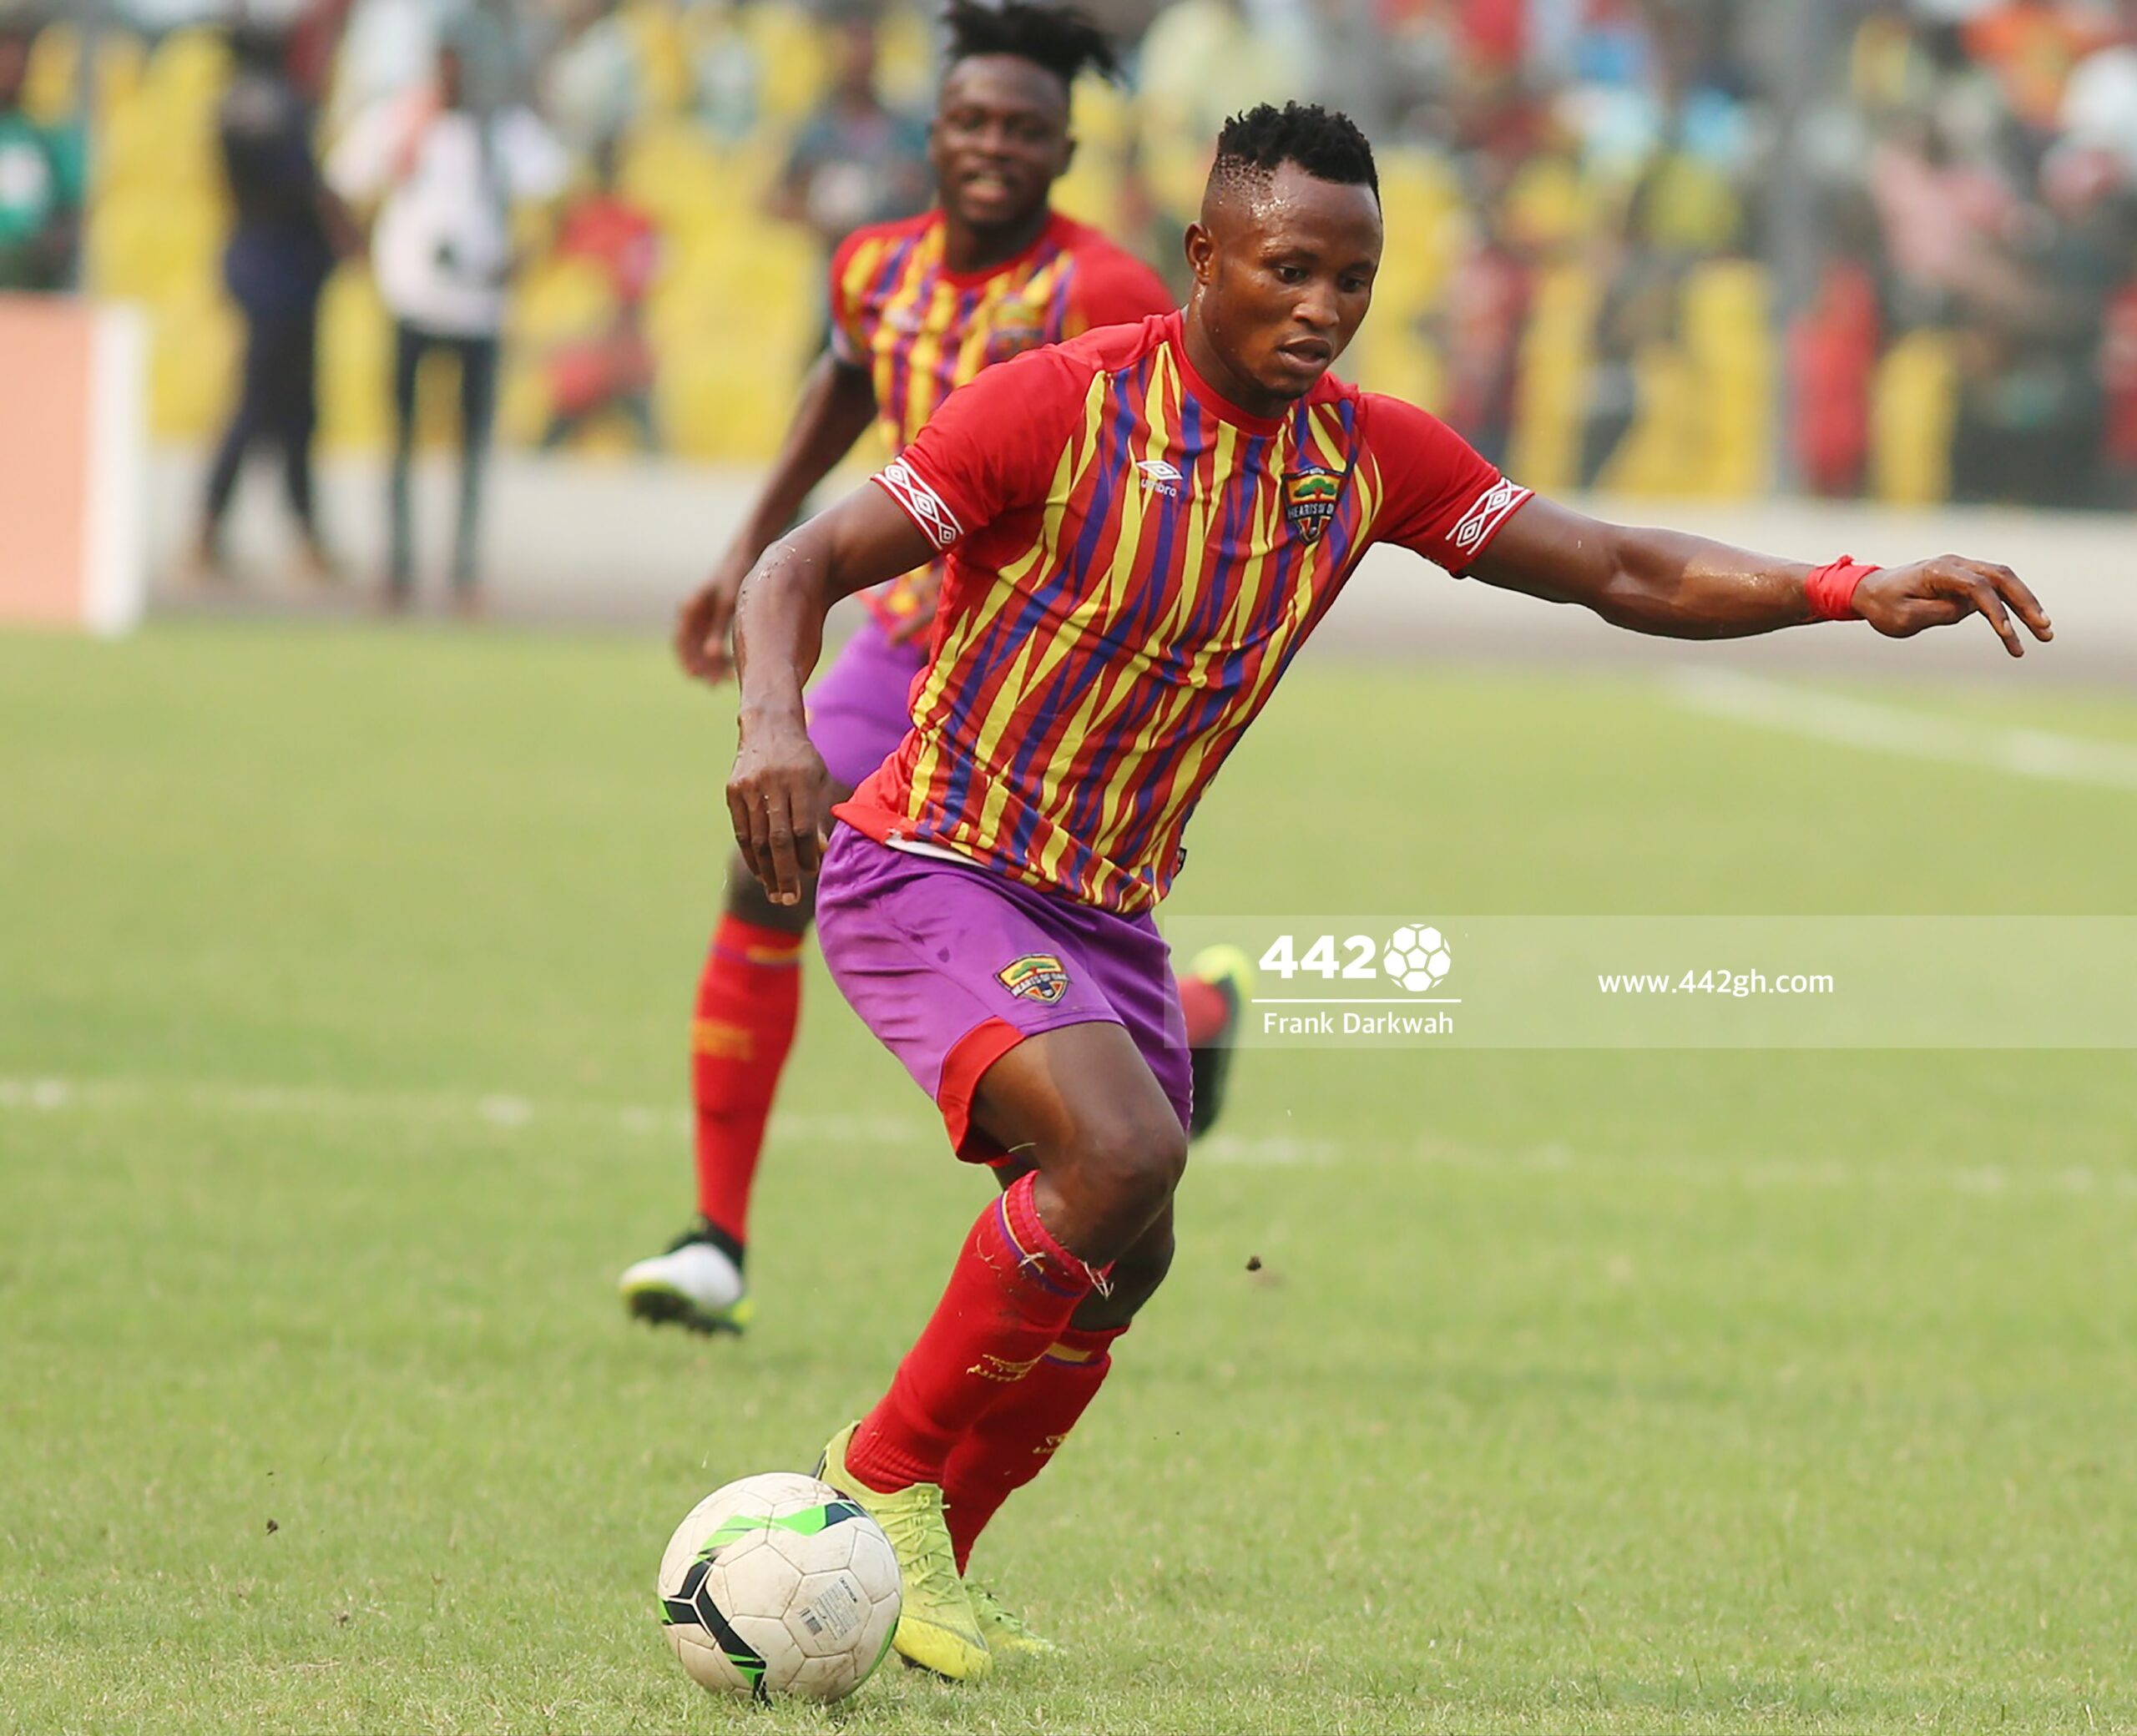 Joseph Esso is yet to agree terms with any club - Agent